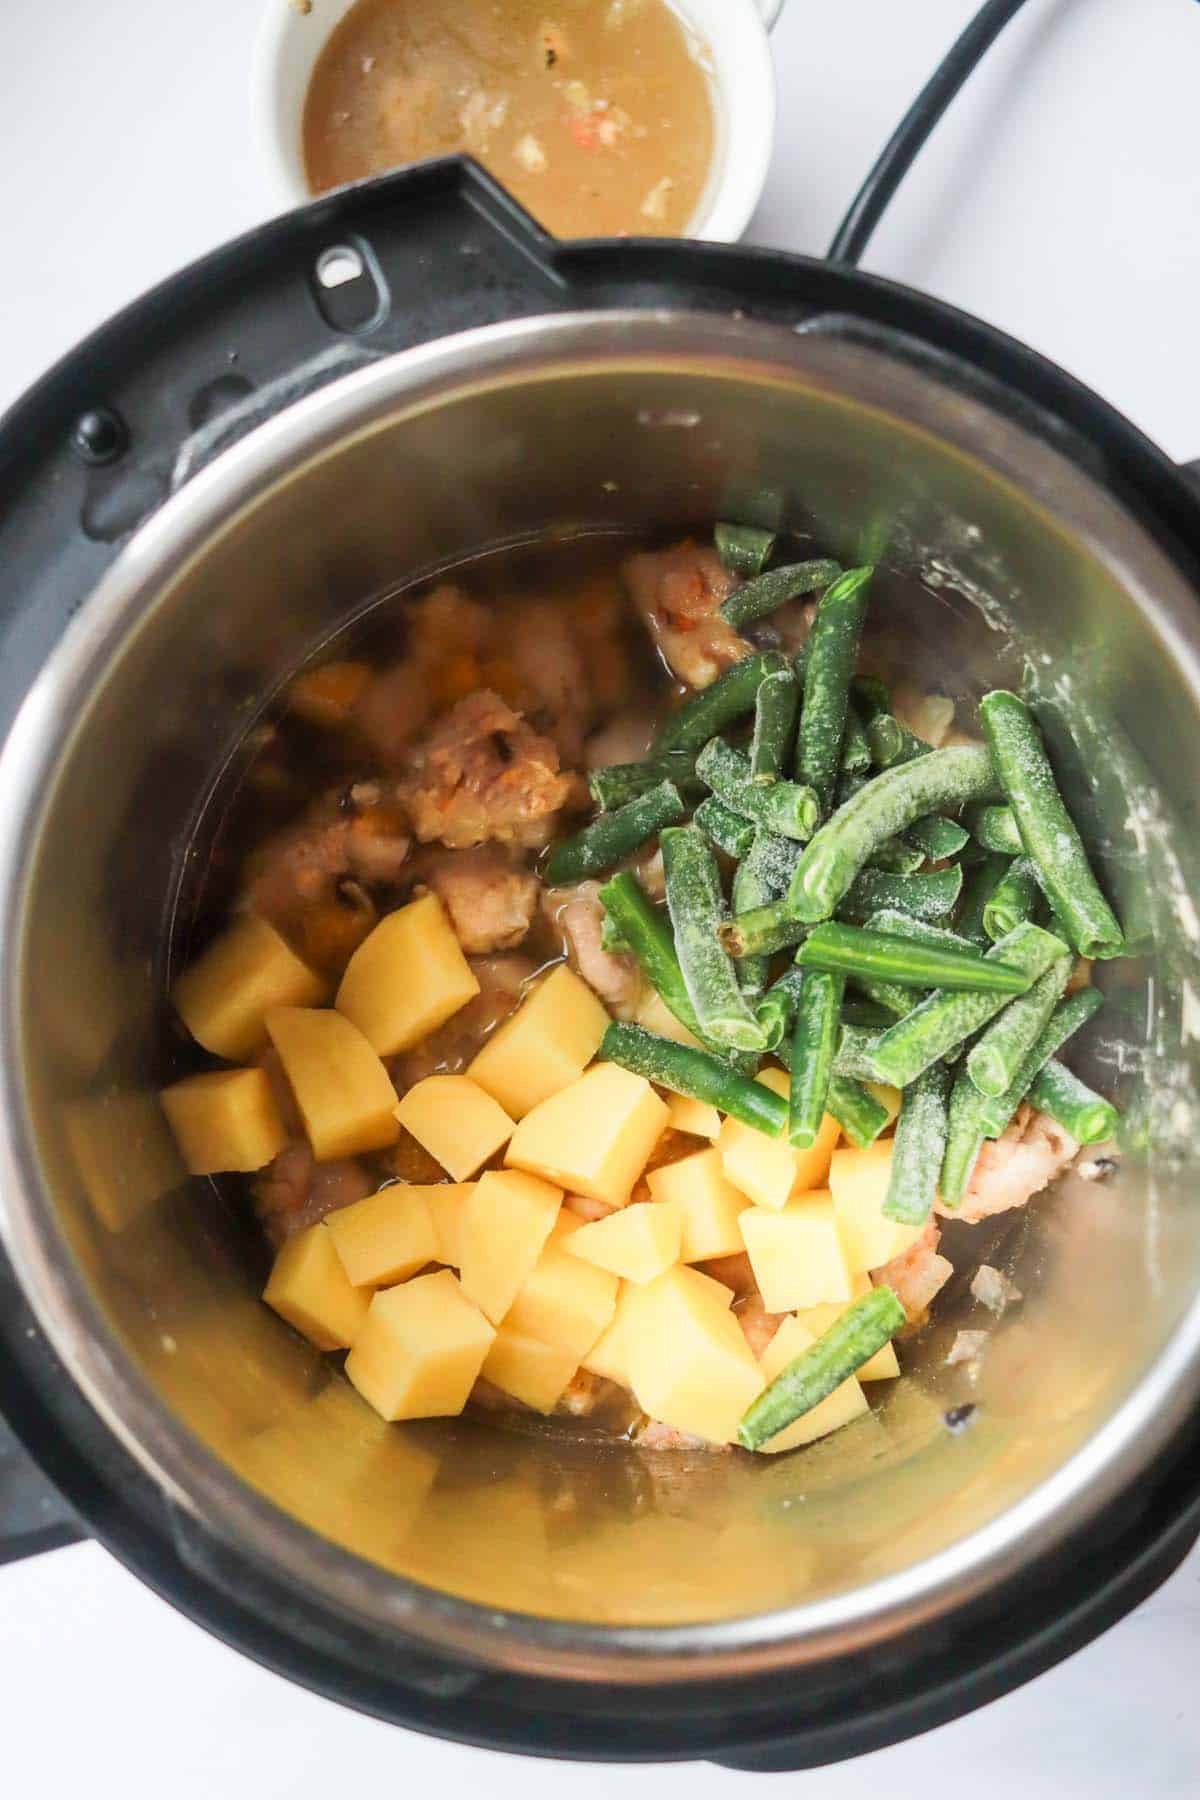 Potatoes and green beans in the Instant Pot.